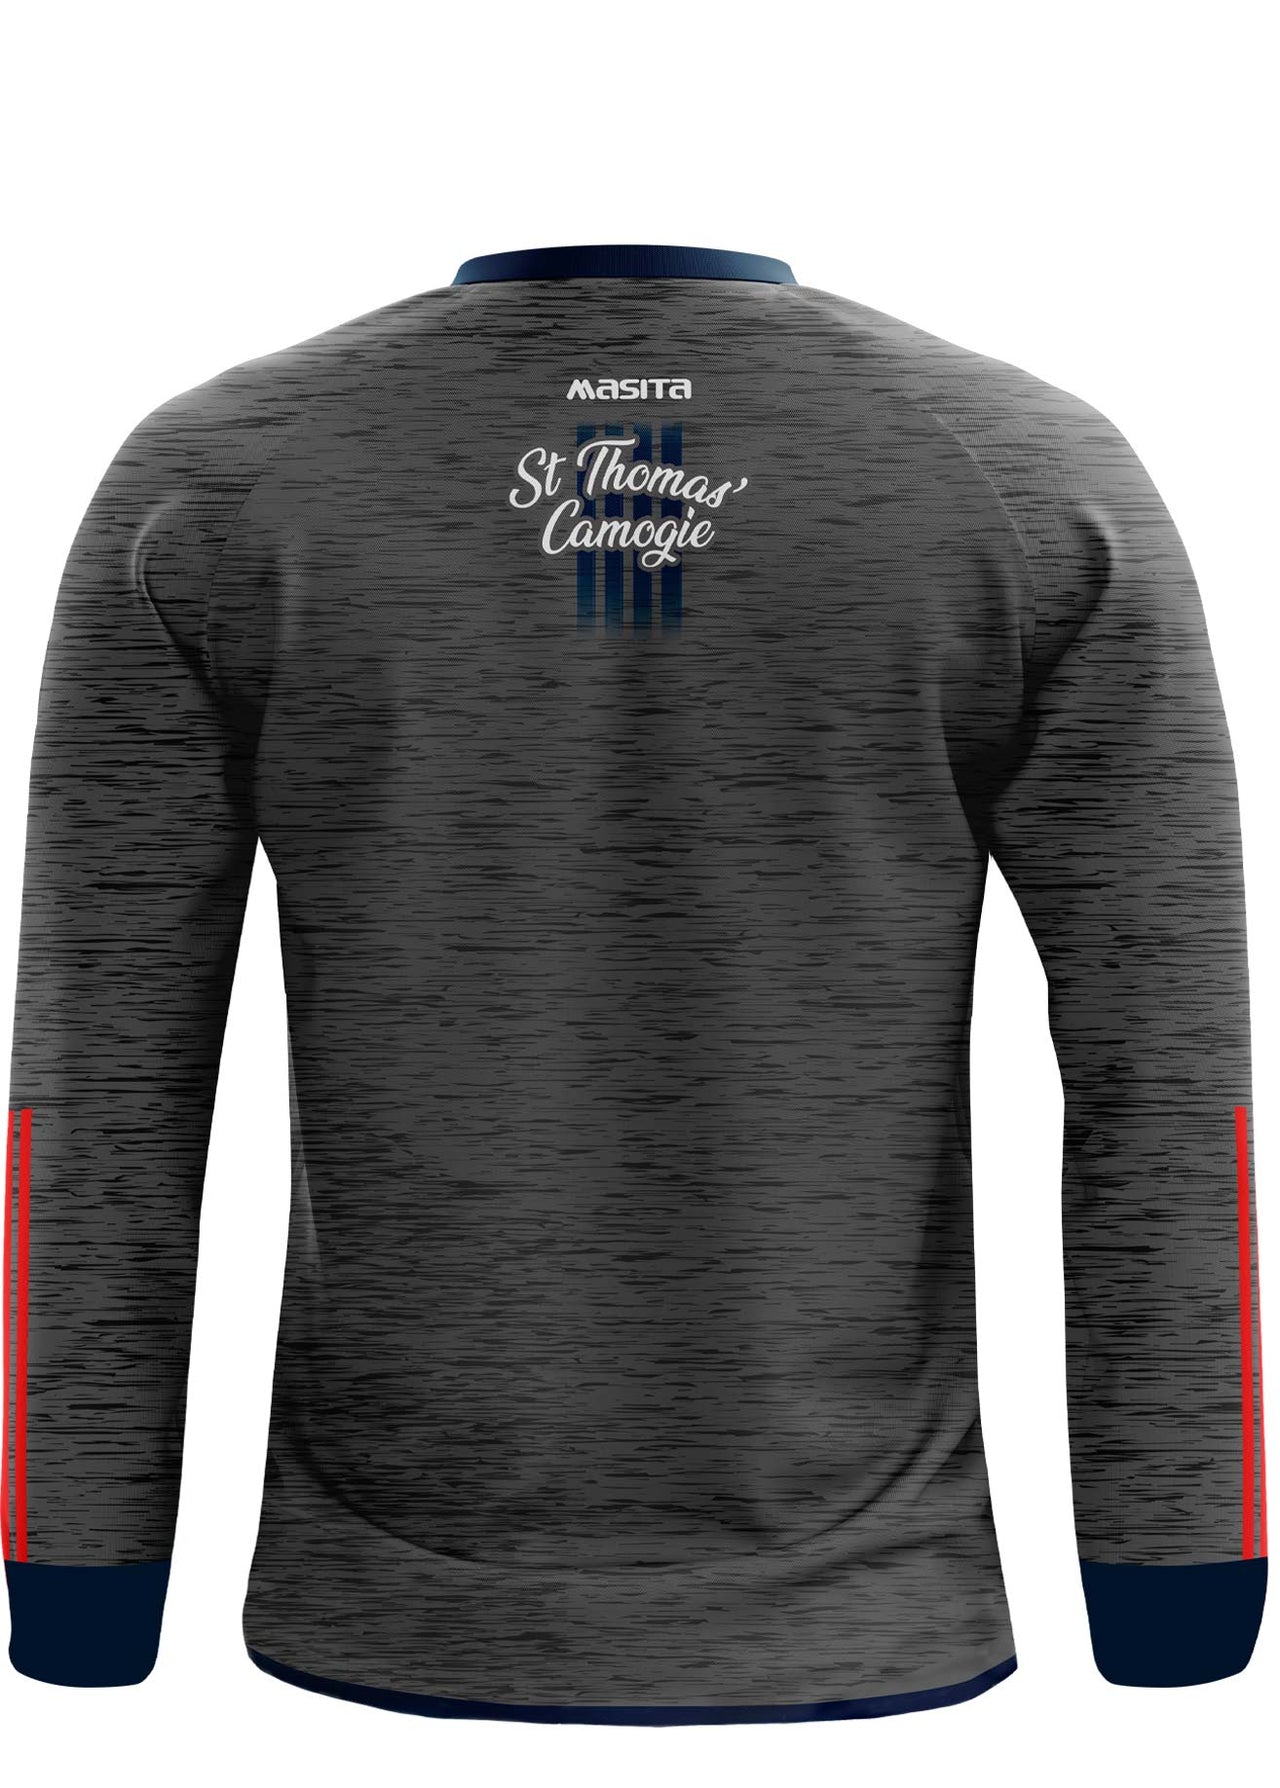 St Thomas' Camogie Grey Sweater Adults